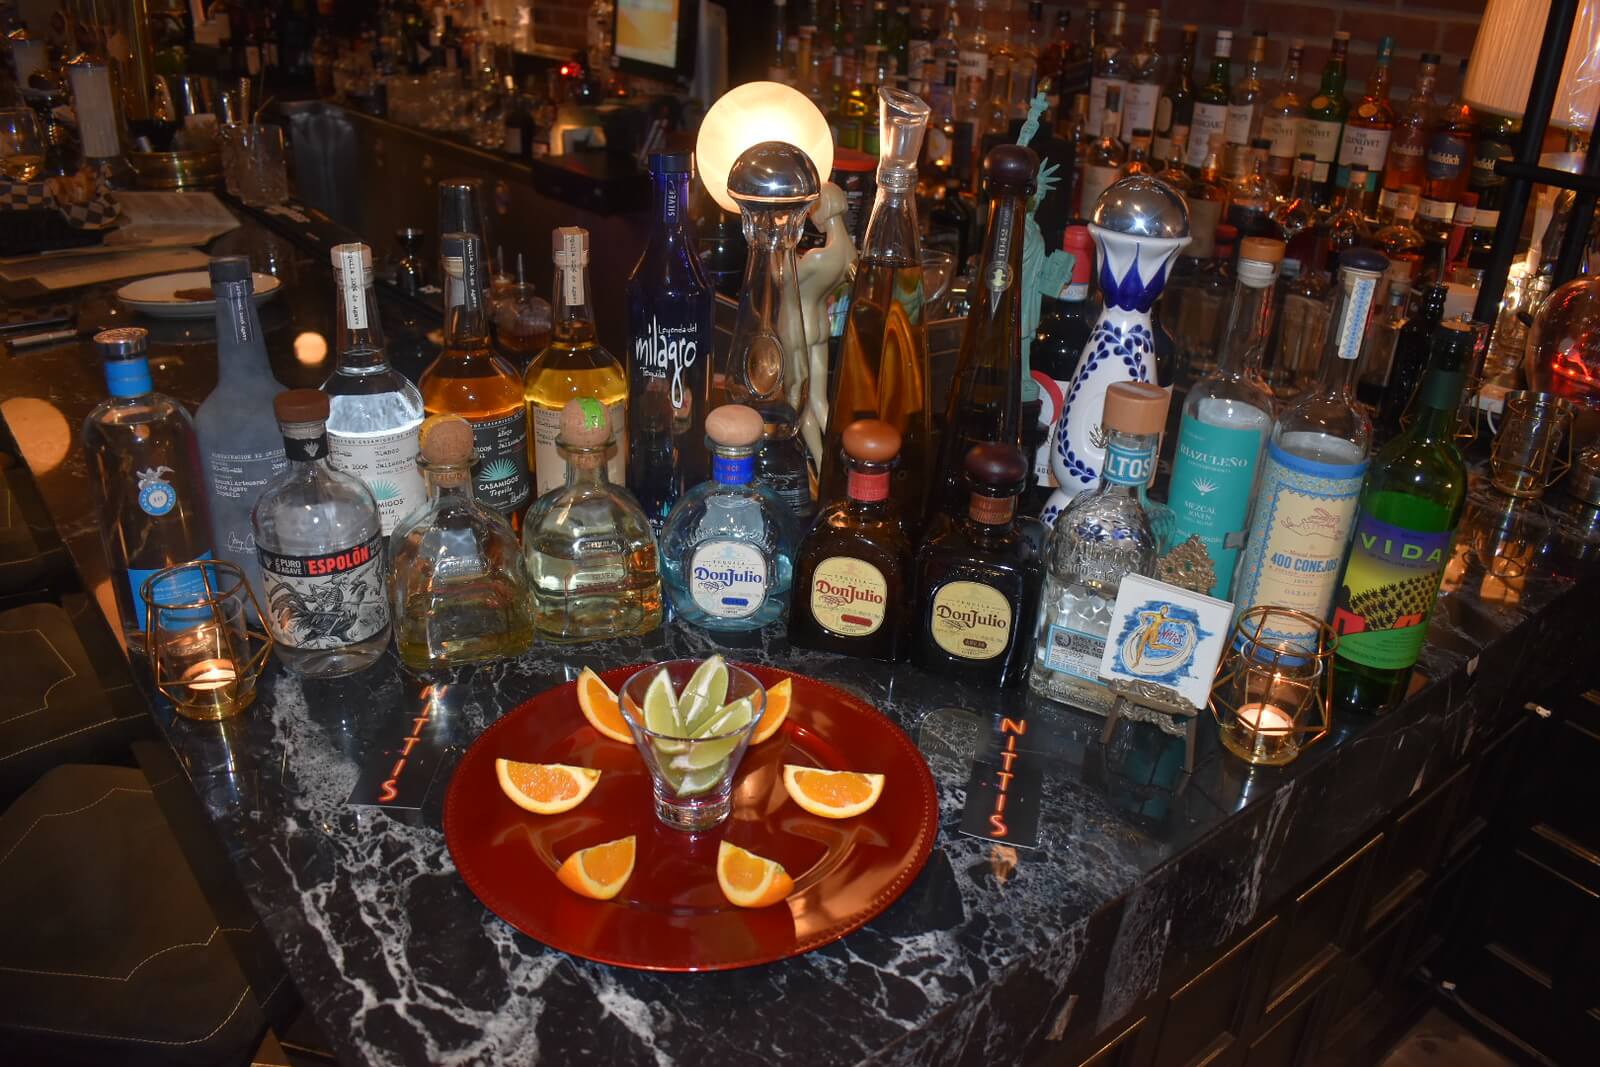 Red plate with a shot glass and citrus slices in front of liquor bottles on the bar